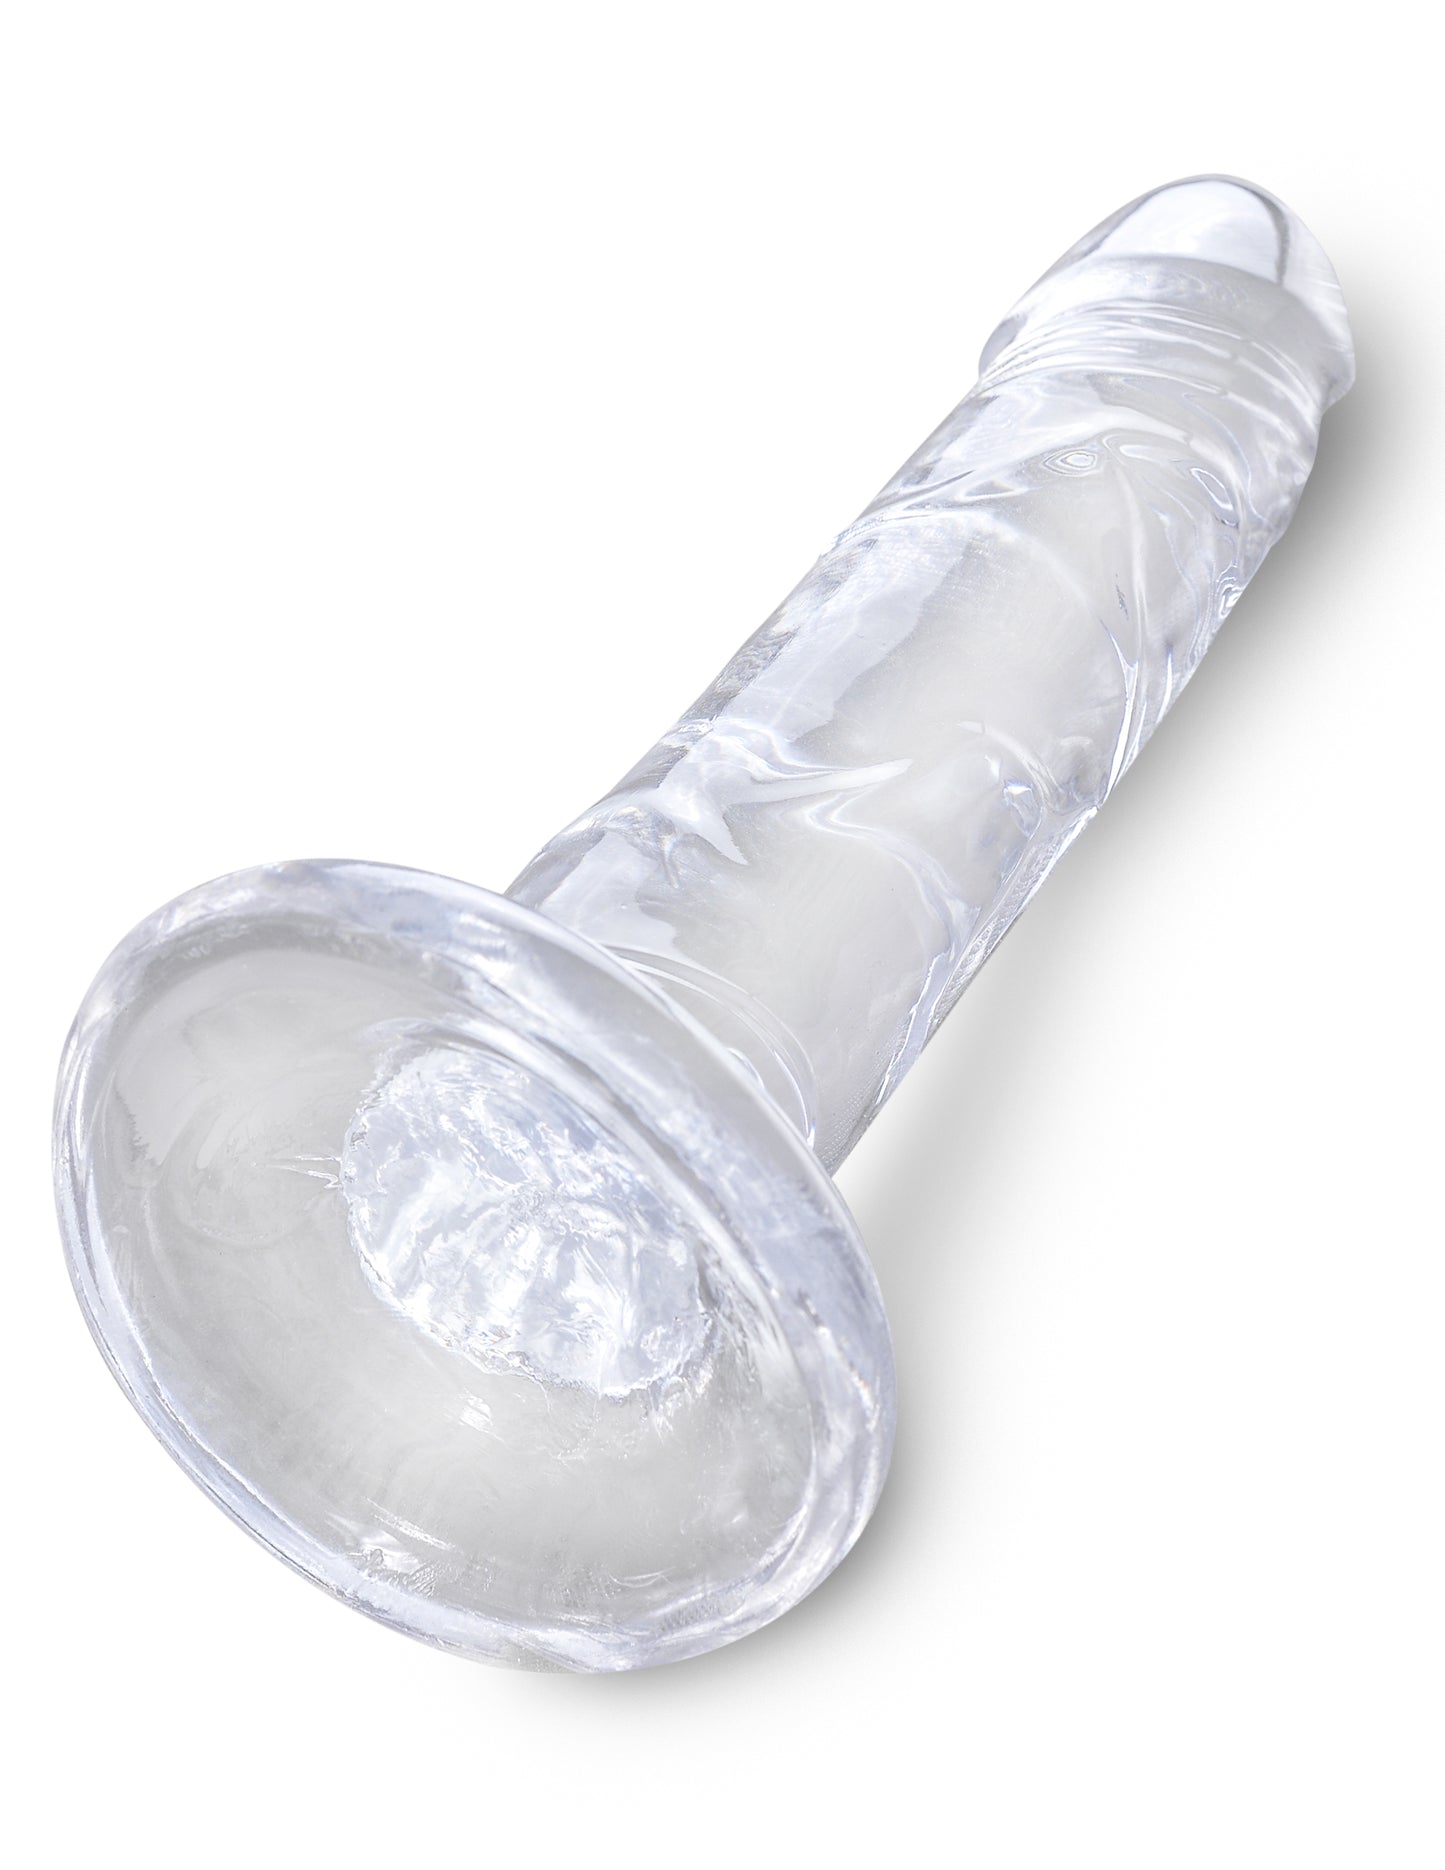 King Cock - 6 inch - Clear